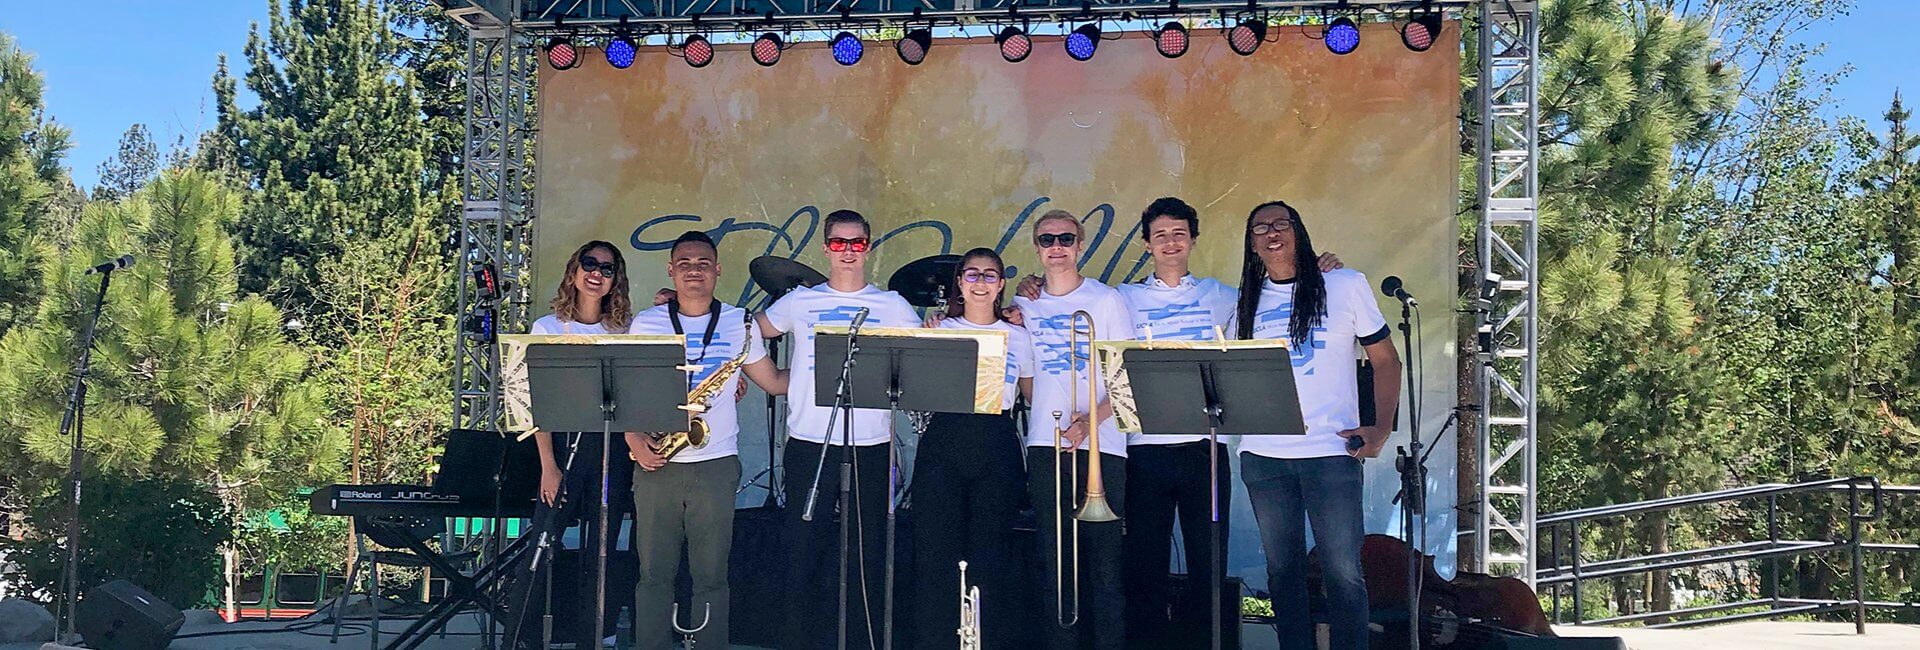 UCLA Global Jazz Ensemble Performs at Mammoth JazzFest The UCLA Herb